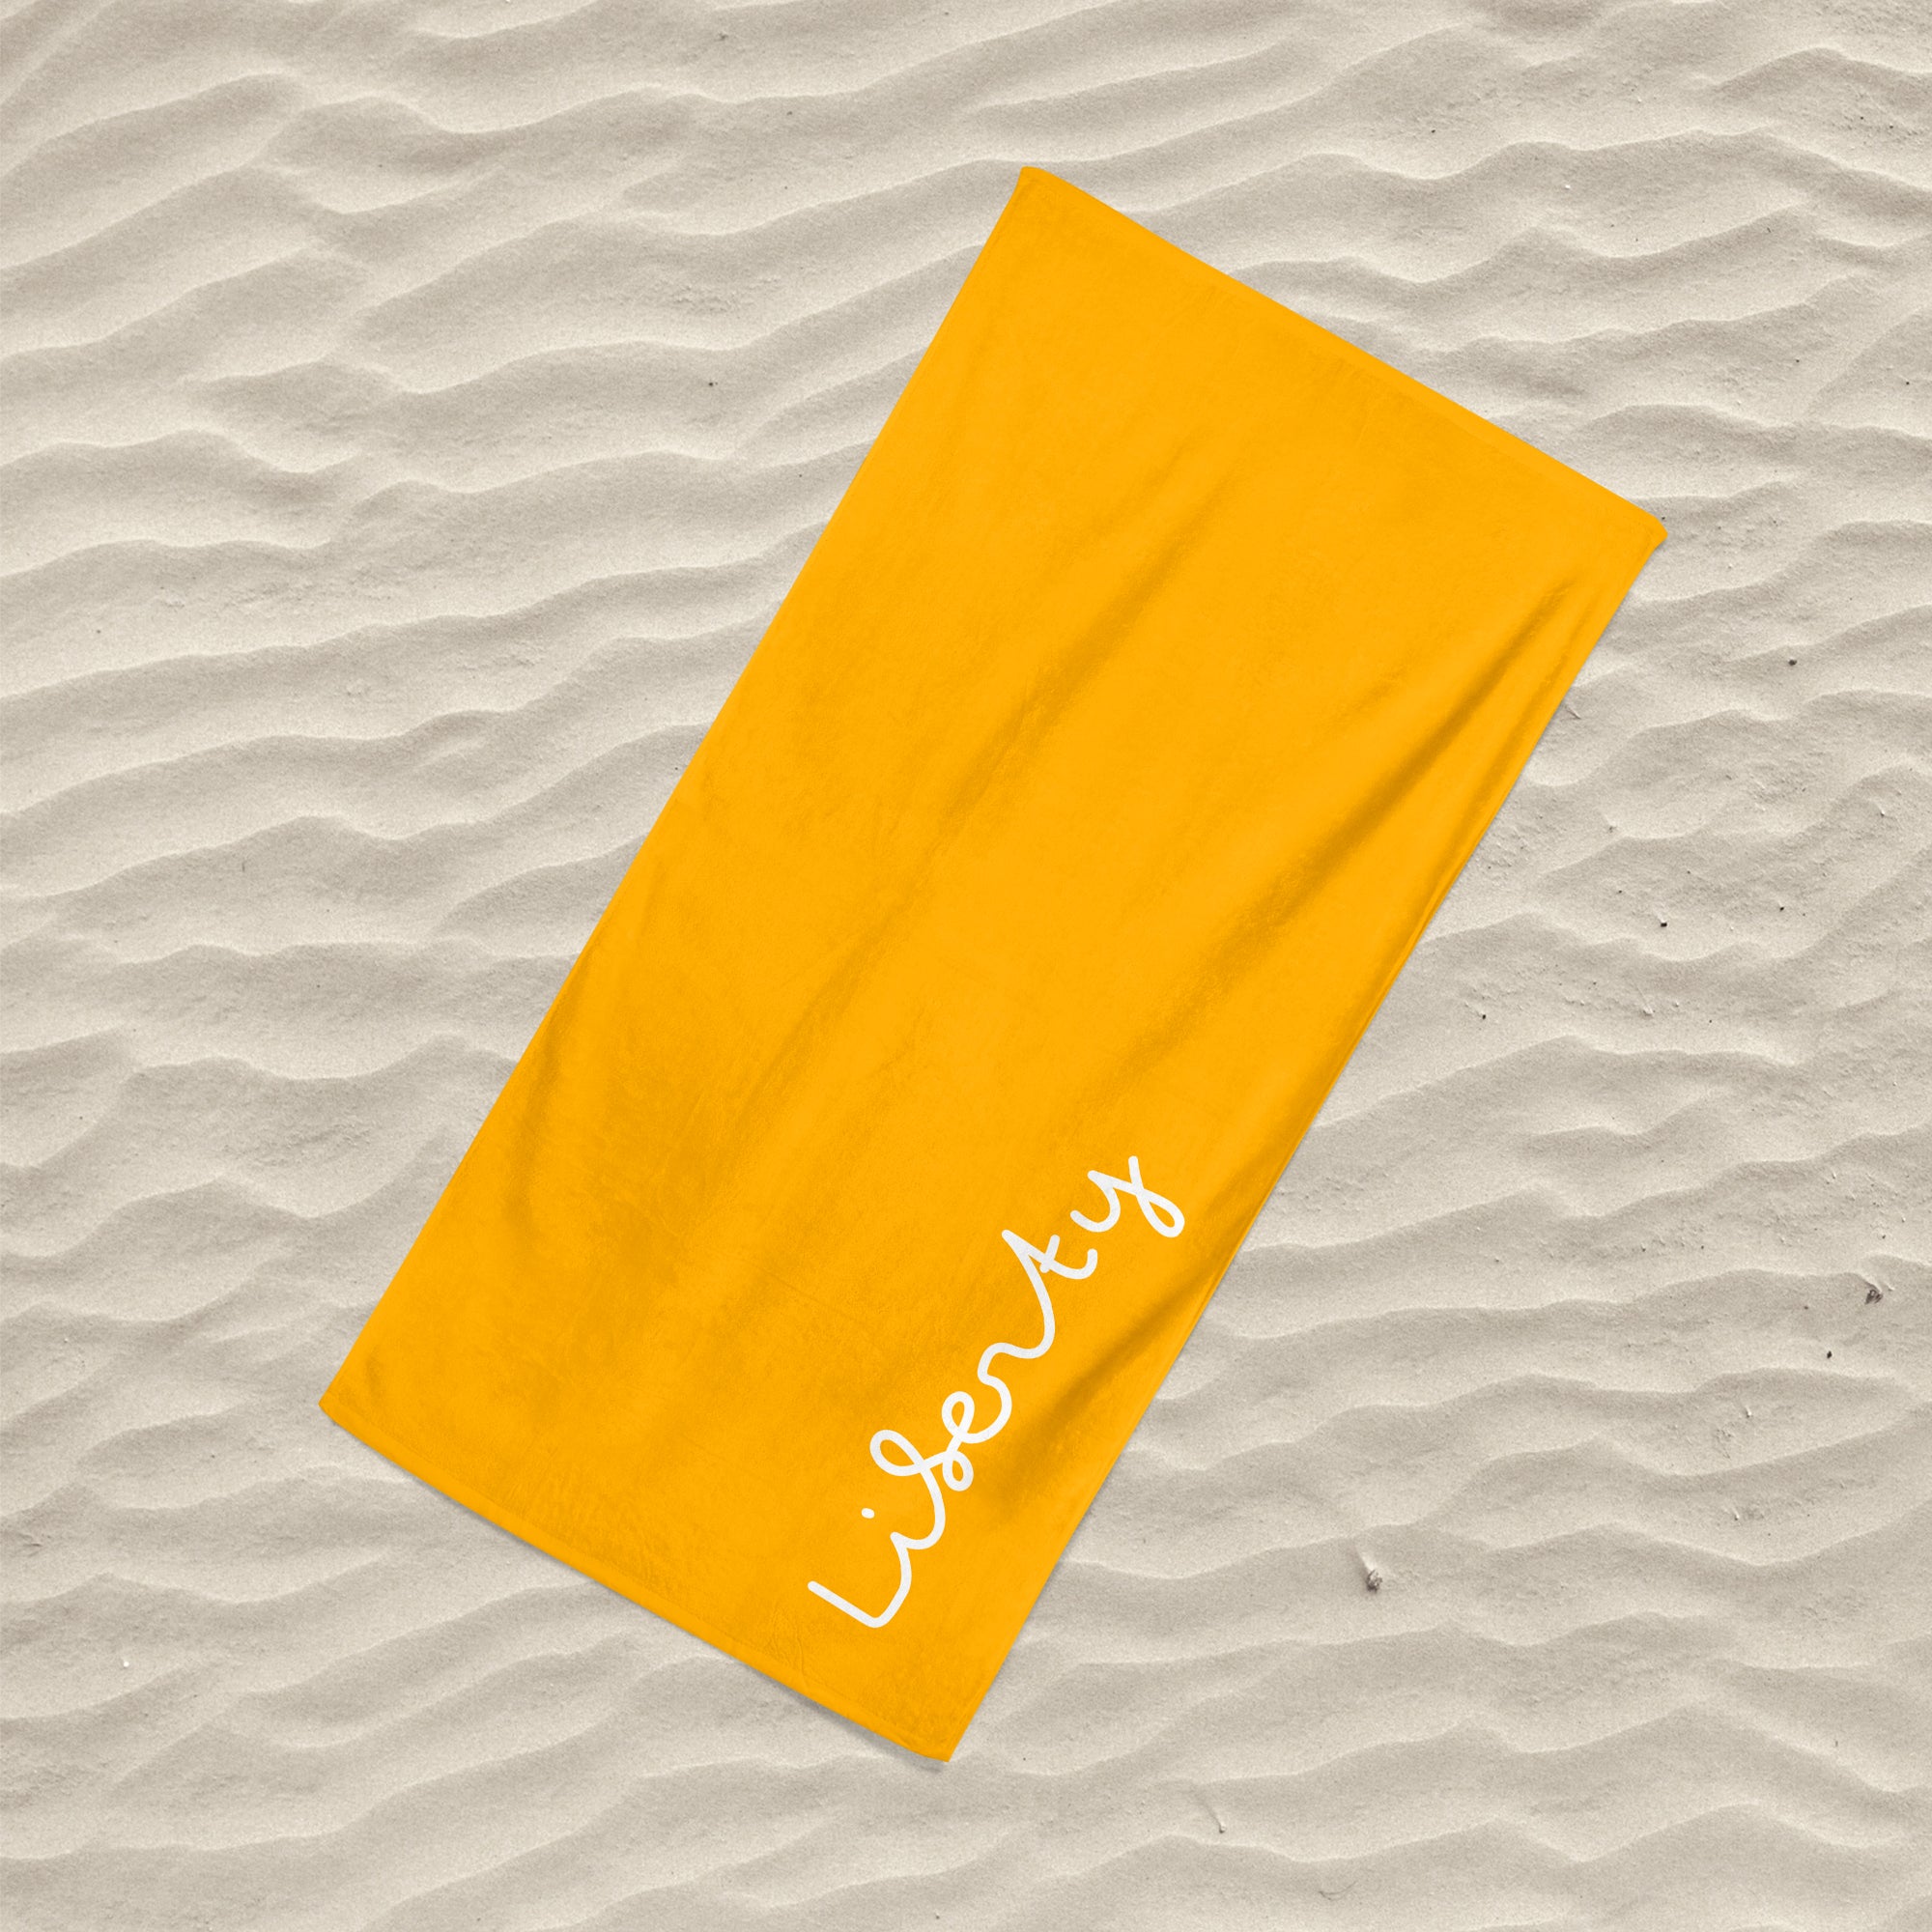 Island Inspired Large Beach Towel White on Orange - Personalise with Name